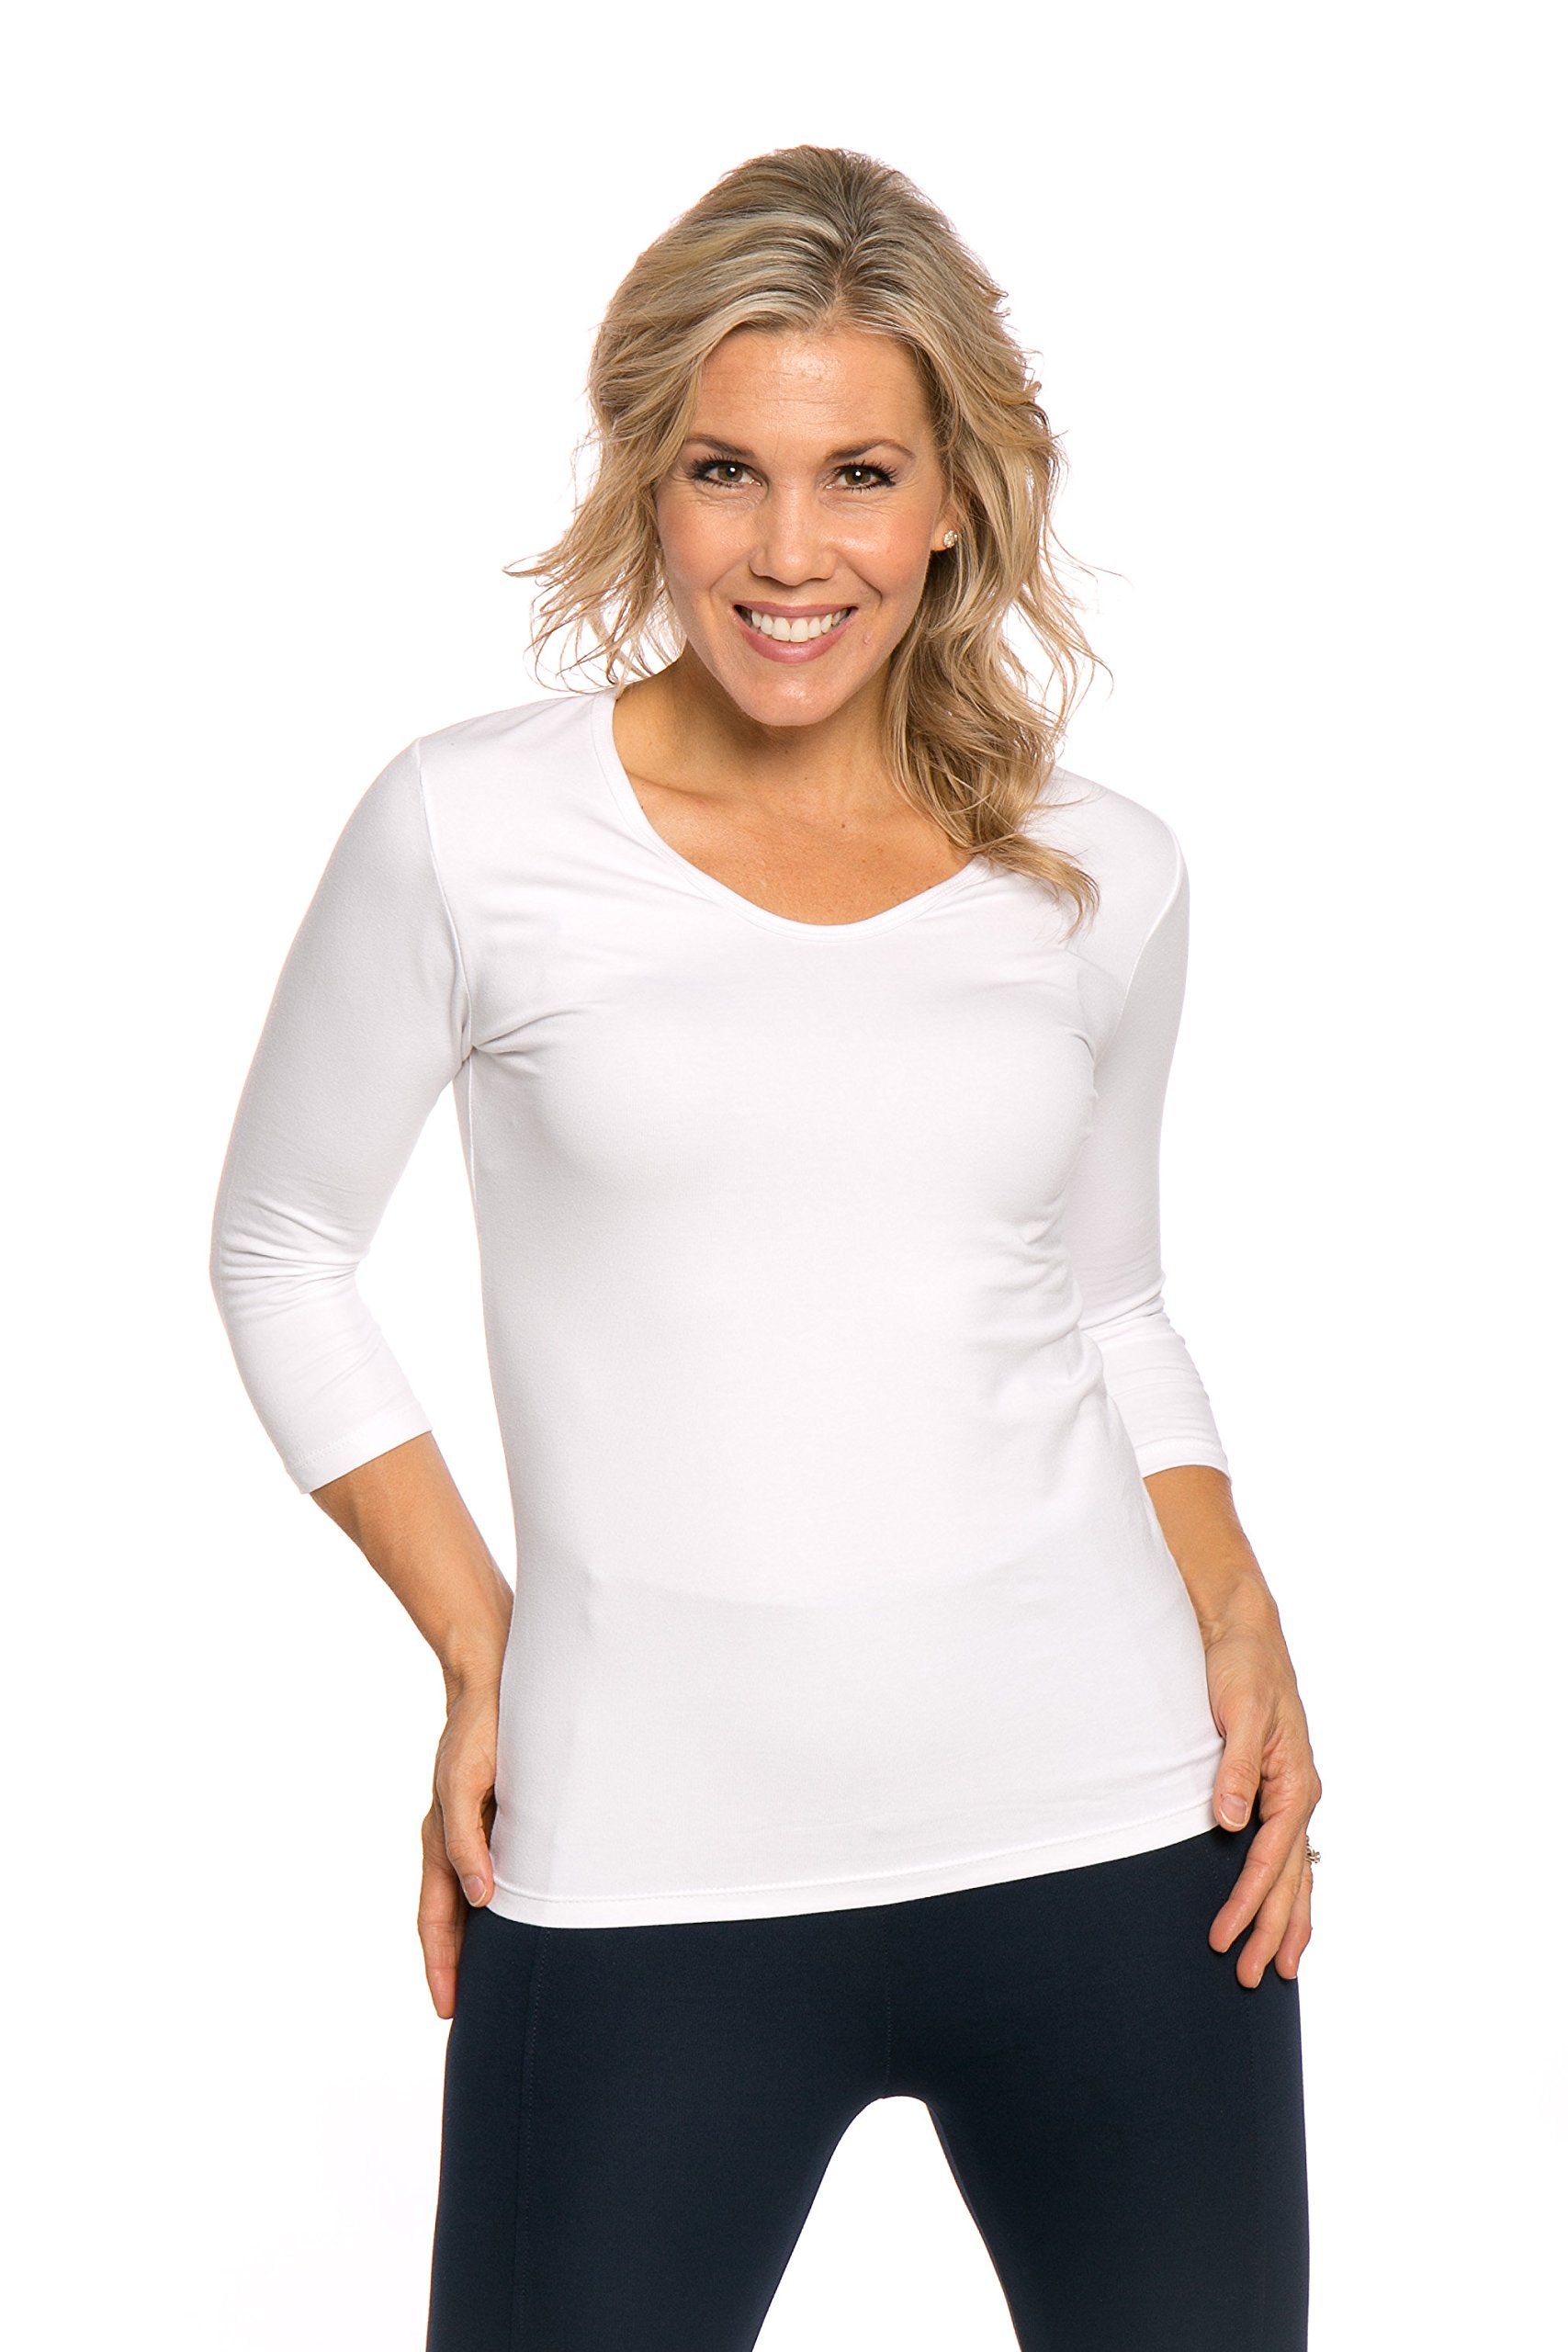 Book Cover Heirloom 3/4 Sleeve V-Neck Top Soft Yet Durable, Extra-Length Layering Top